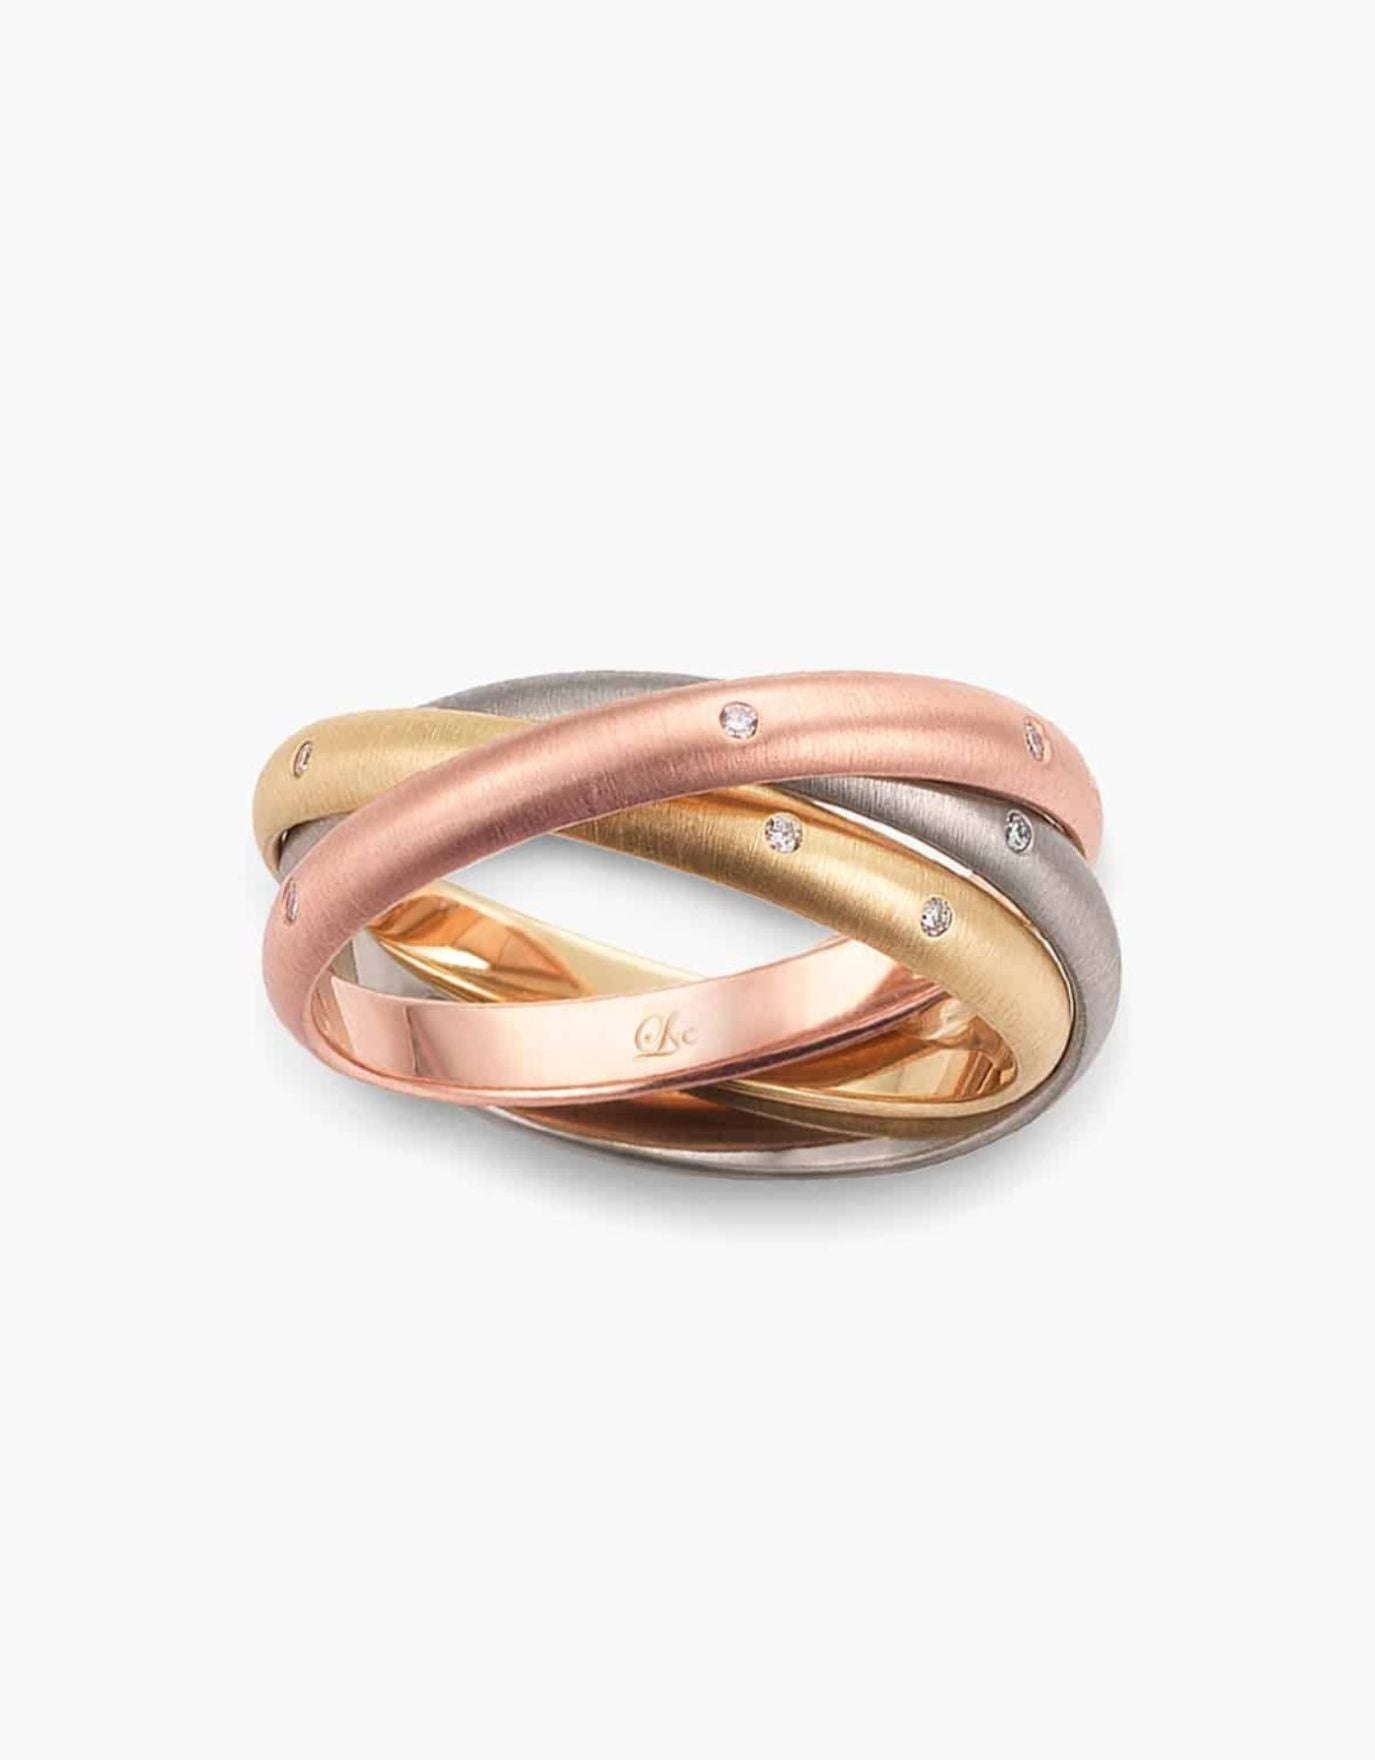 LVC Soleil Trinity Wedding Band in Yellow, White, and Rose Gold with Satin Finish